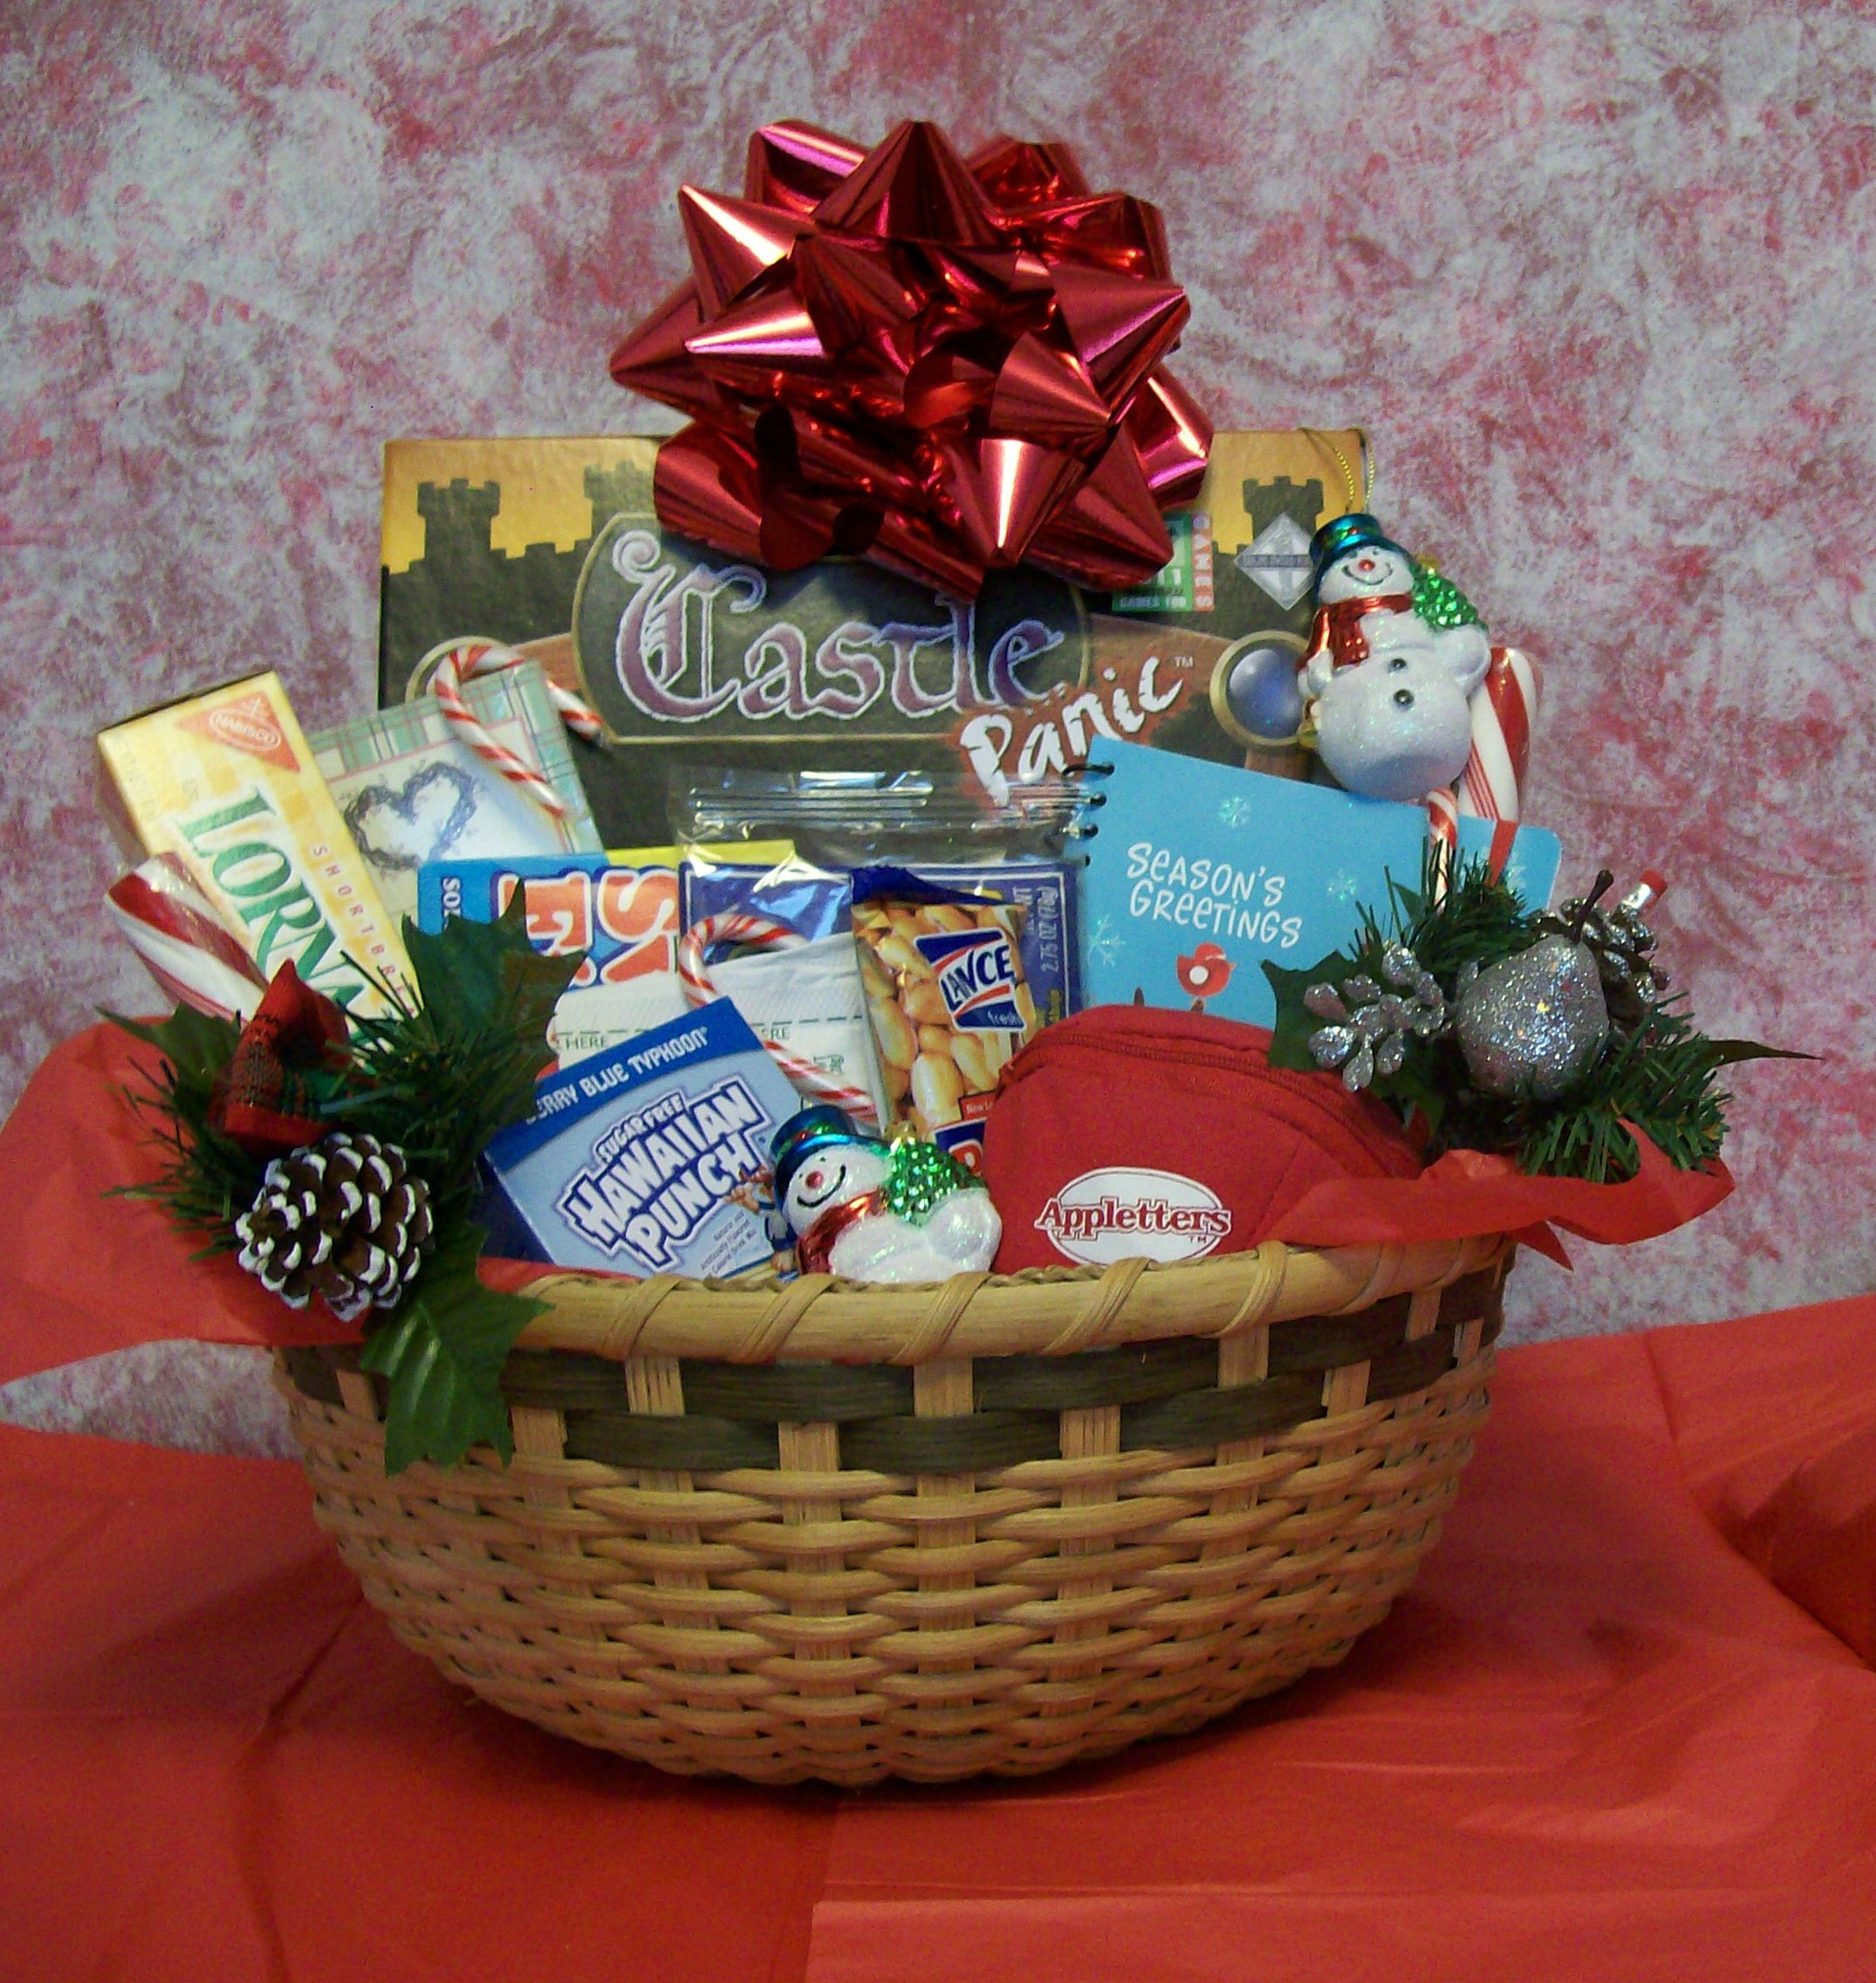 Holiday Gift Ideas Family
 Create a Christmas Fun and Games Gift Basket for a Family